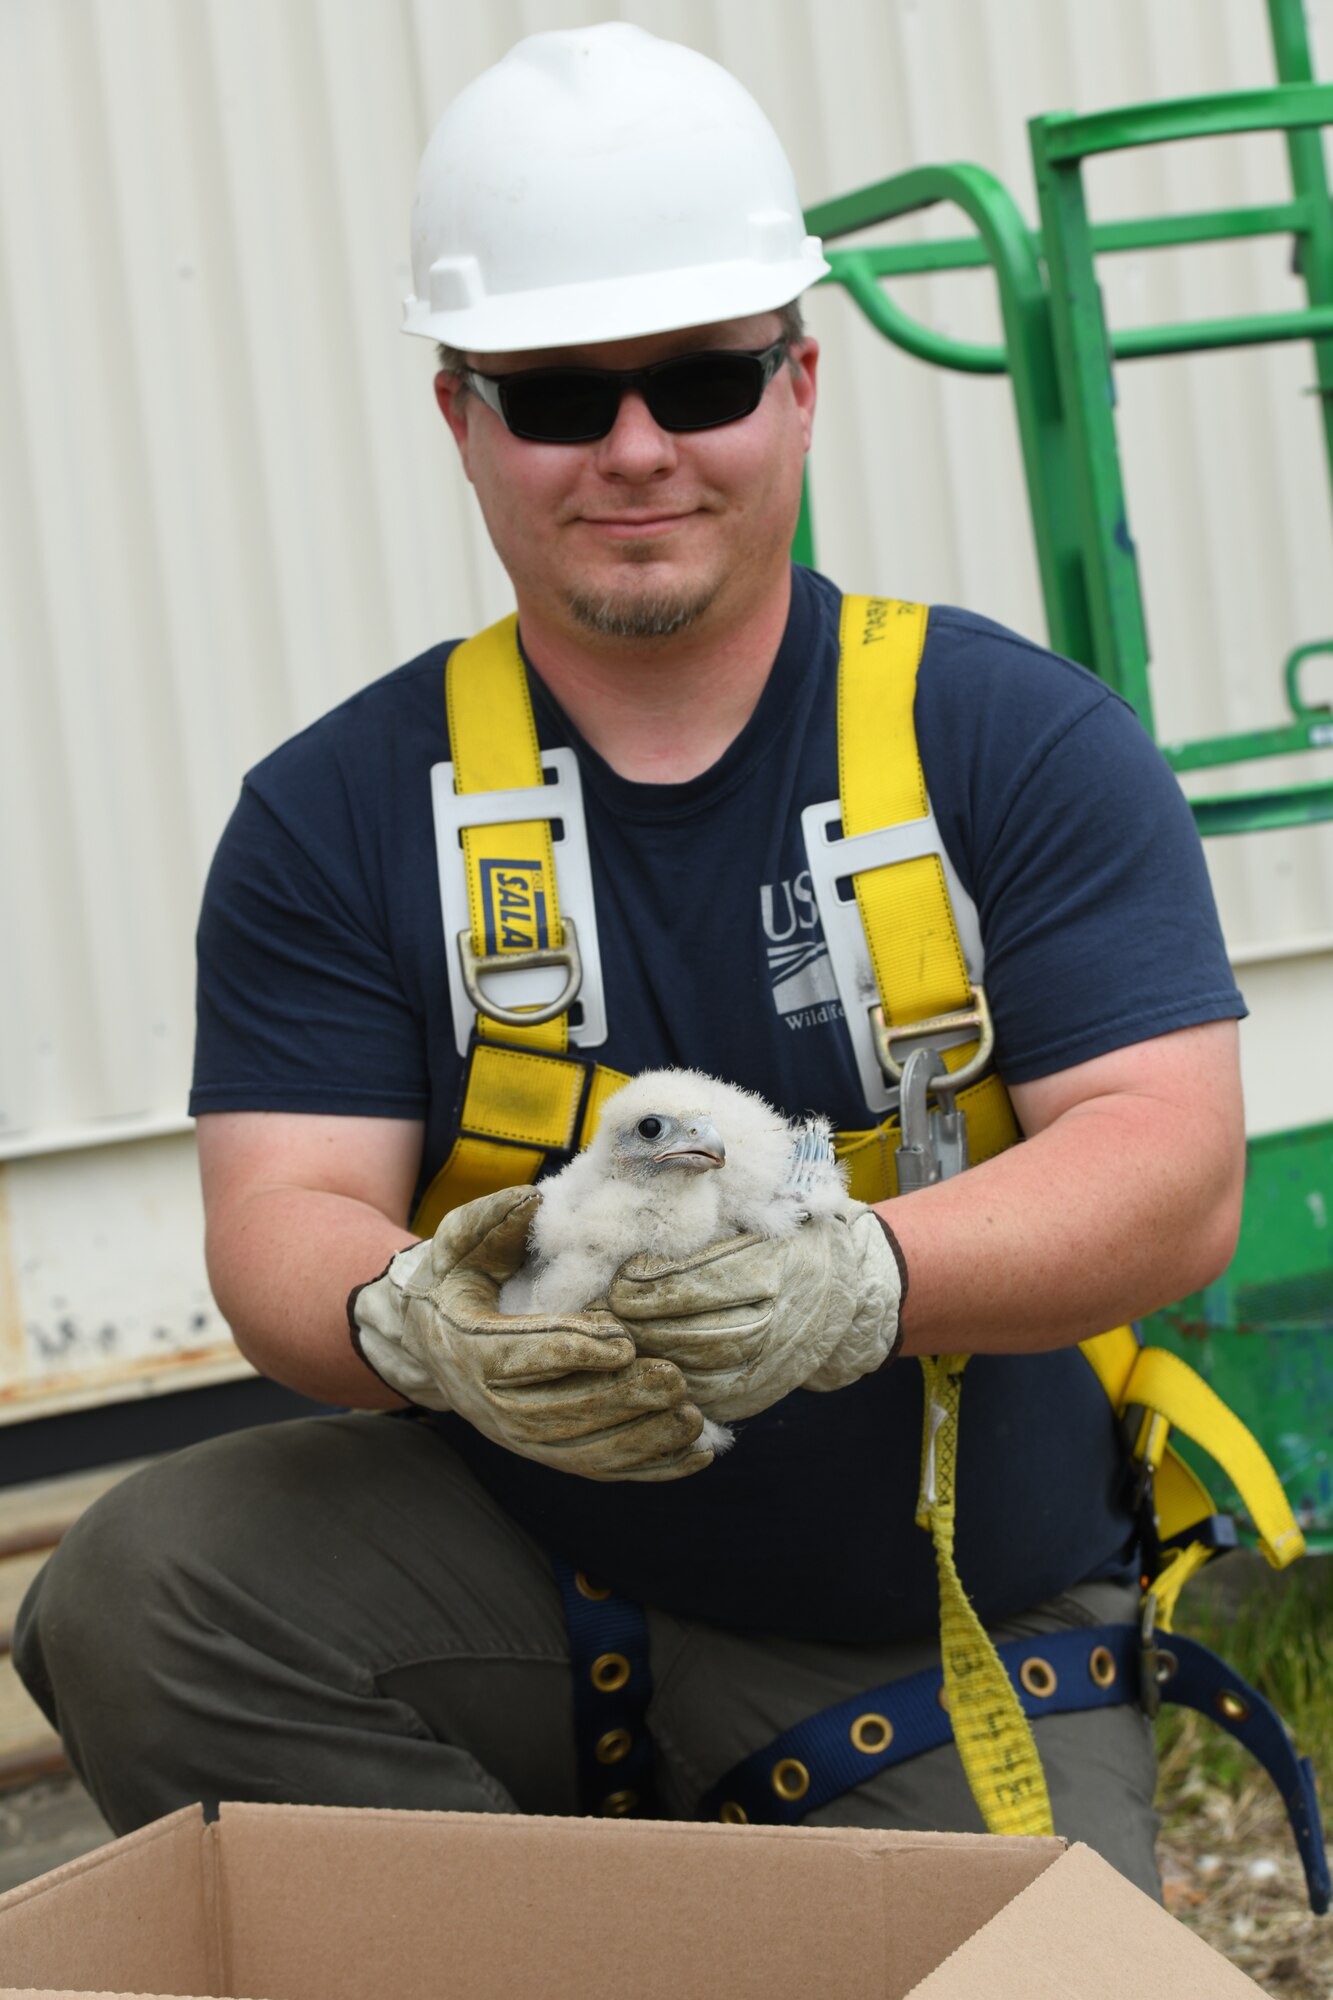 James Streeter, USDA wildlife biologist, holds a peregrine falcon chick rescued from the ISO-dock at Westover Air Reserve Base, M.A., June 3, 2021.